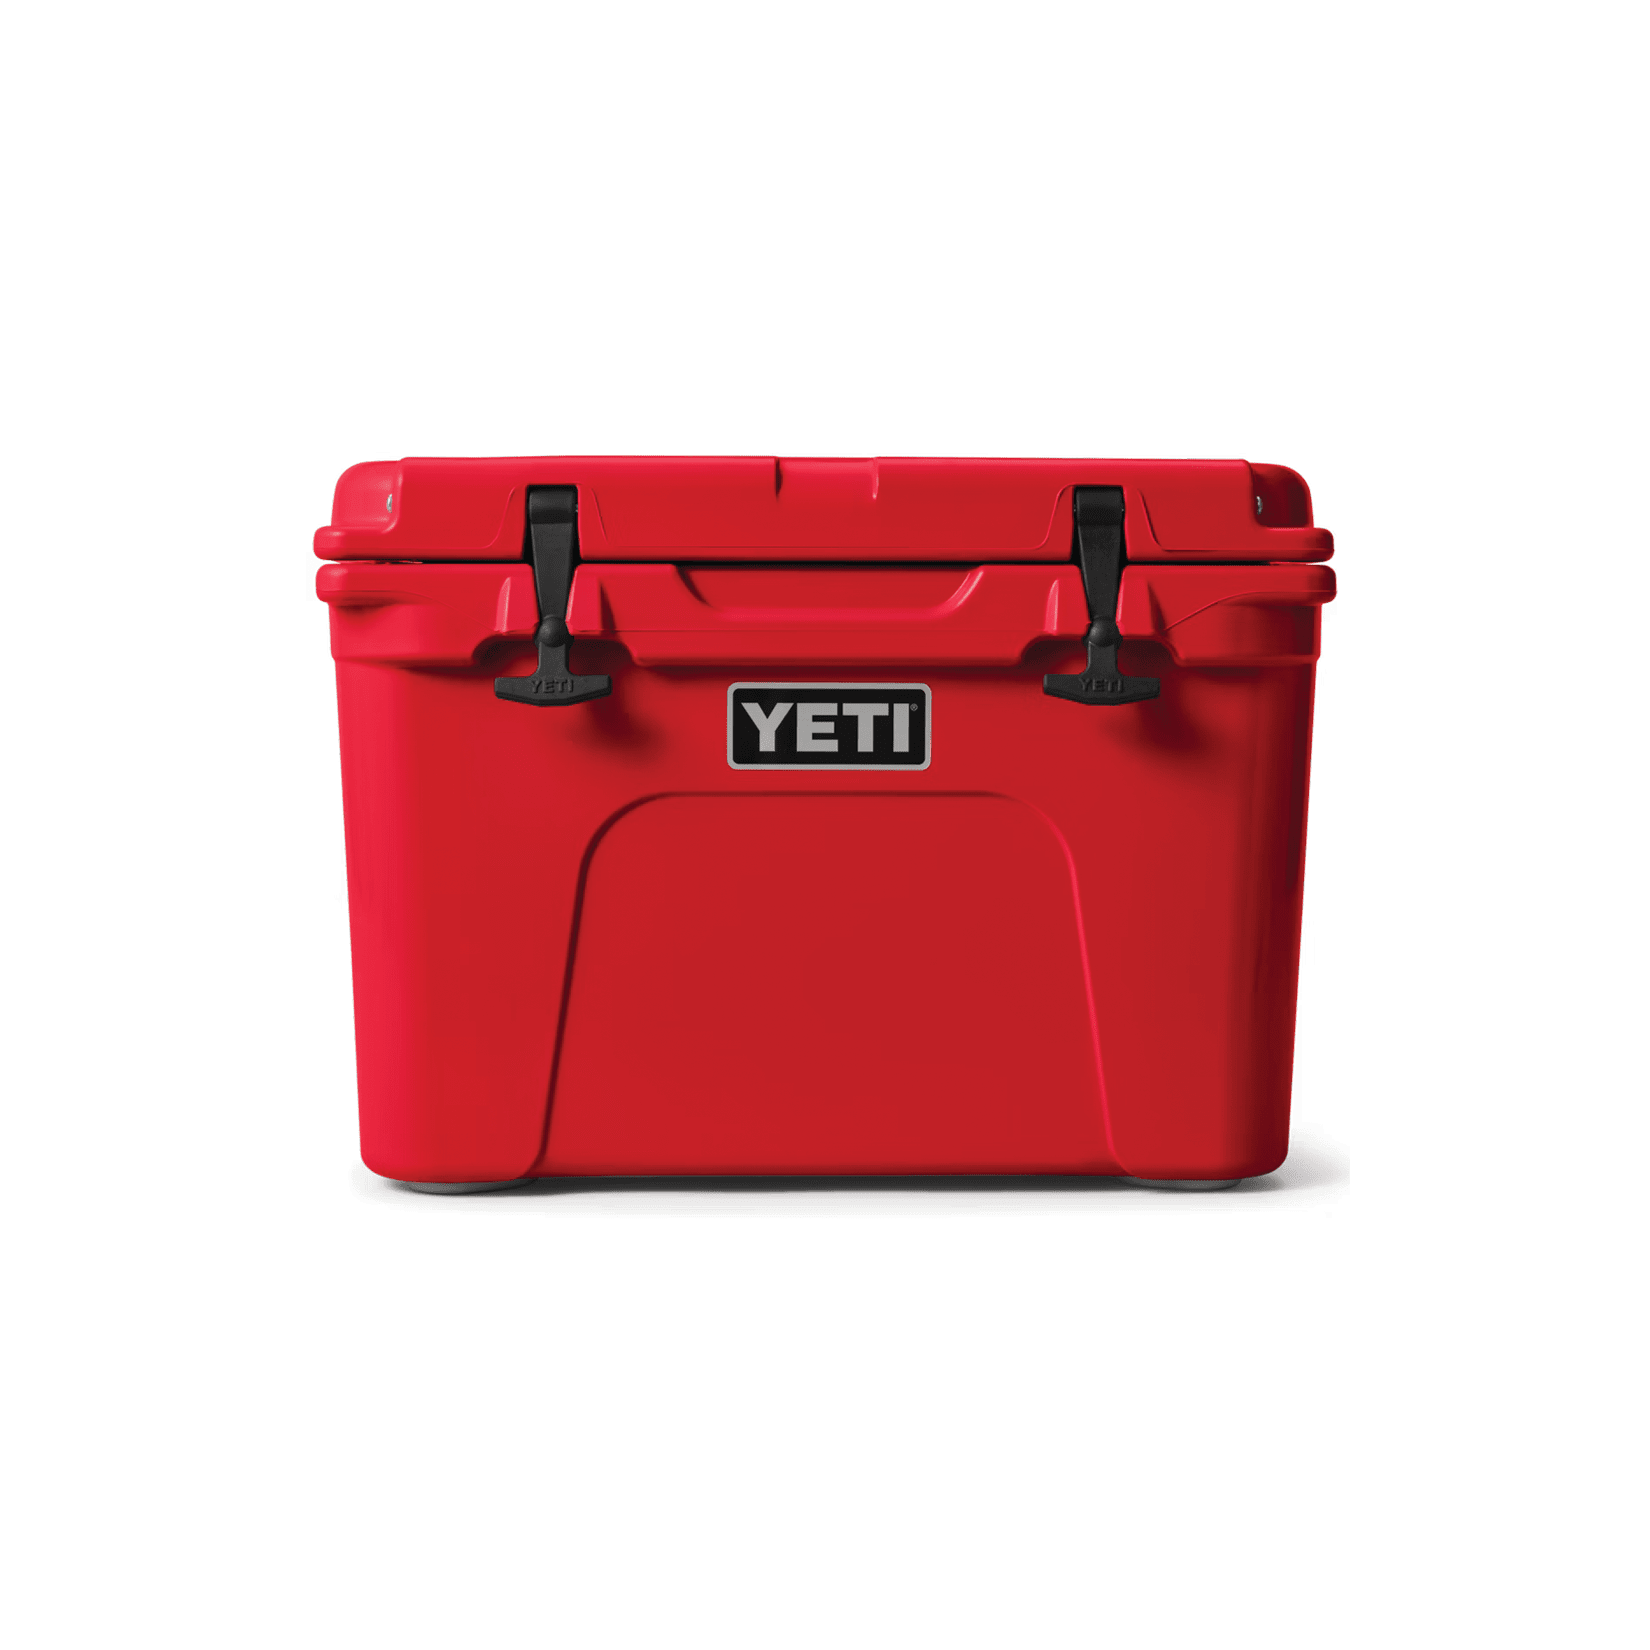 https://image.fisheriessupply.com/c_lpad,dpr_3.0,w_550,h_550,d_imageComingSoon-tiff/f_auto,q_auto/v1/static-images/yeti-tundra-coolers-white-rescue-red